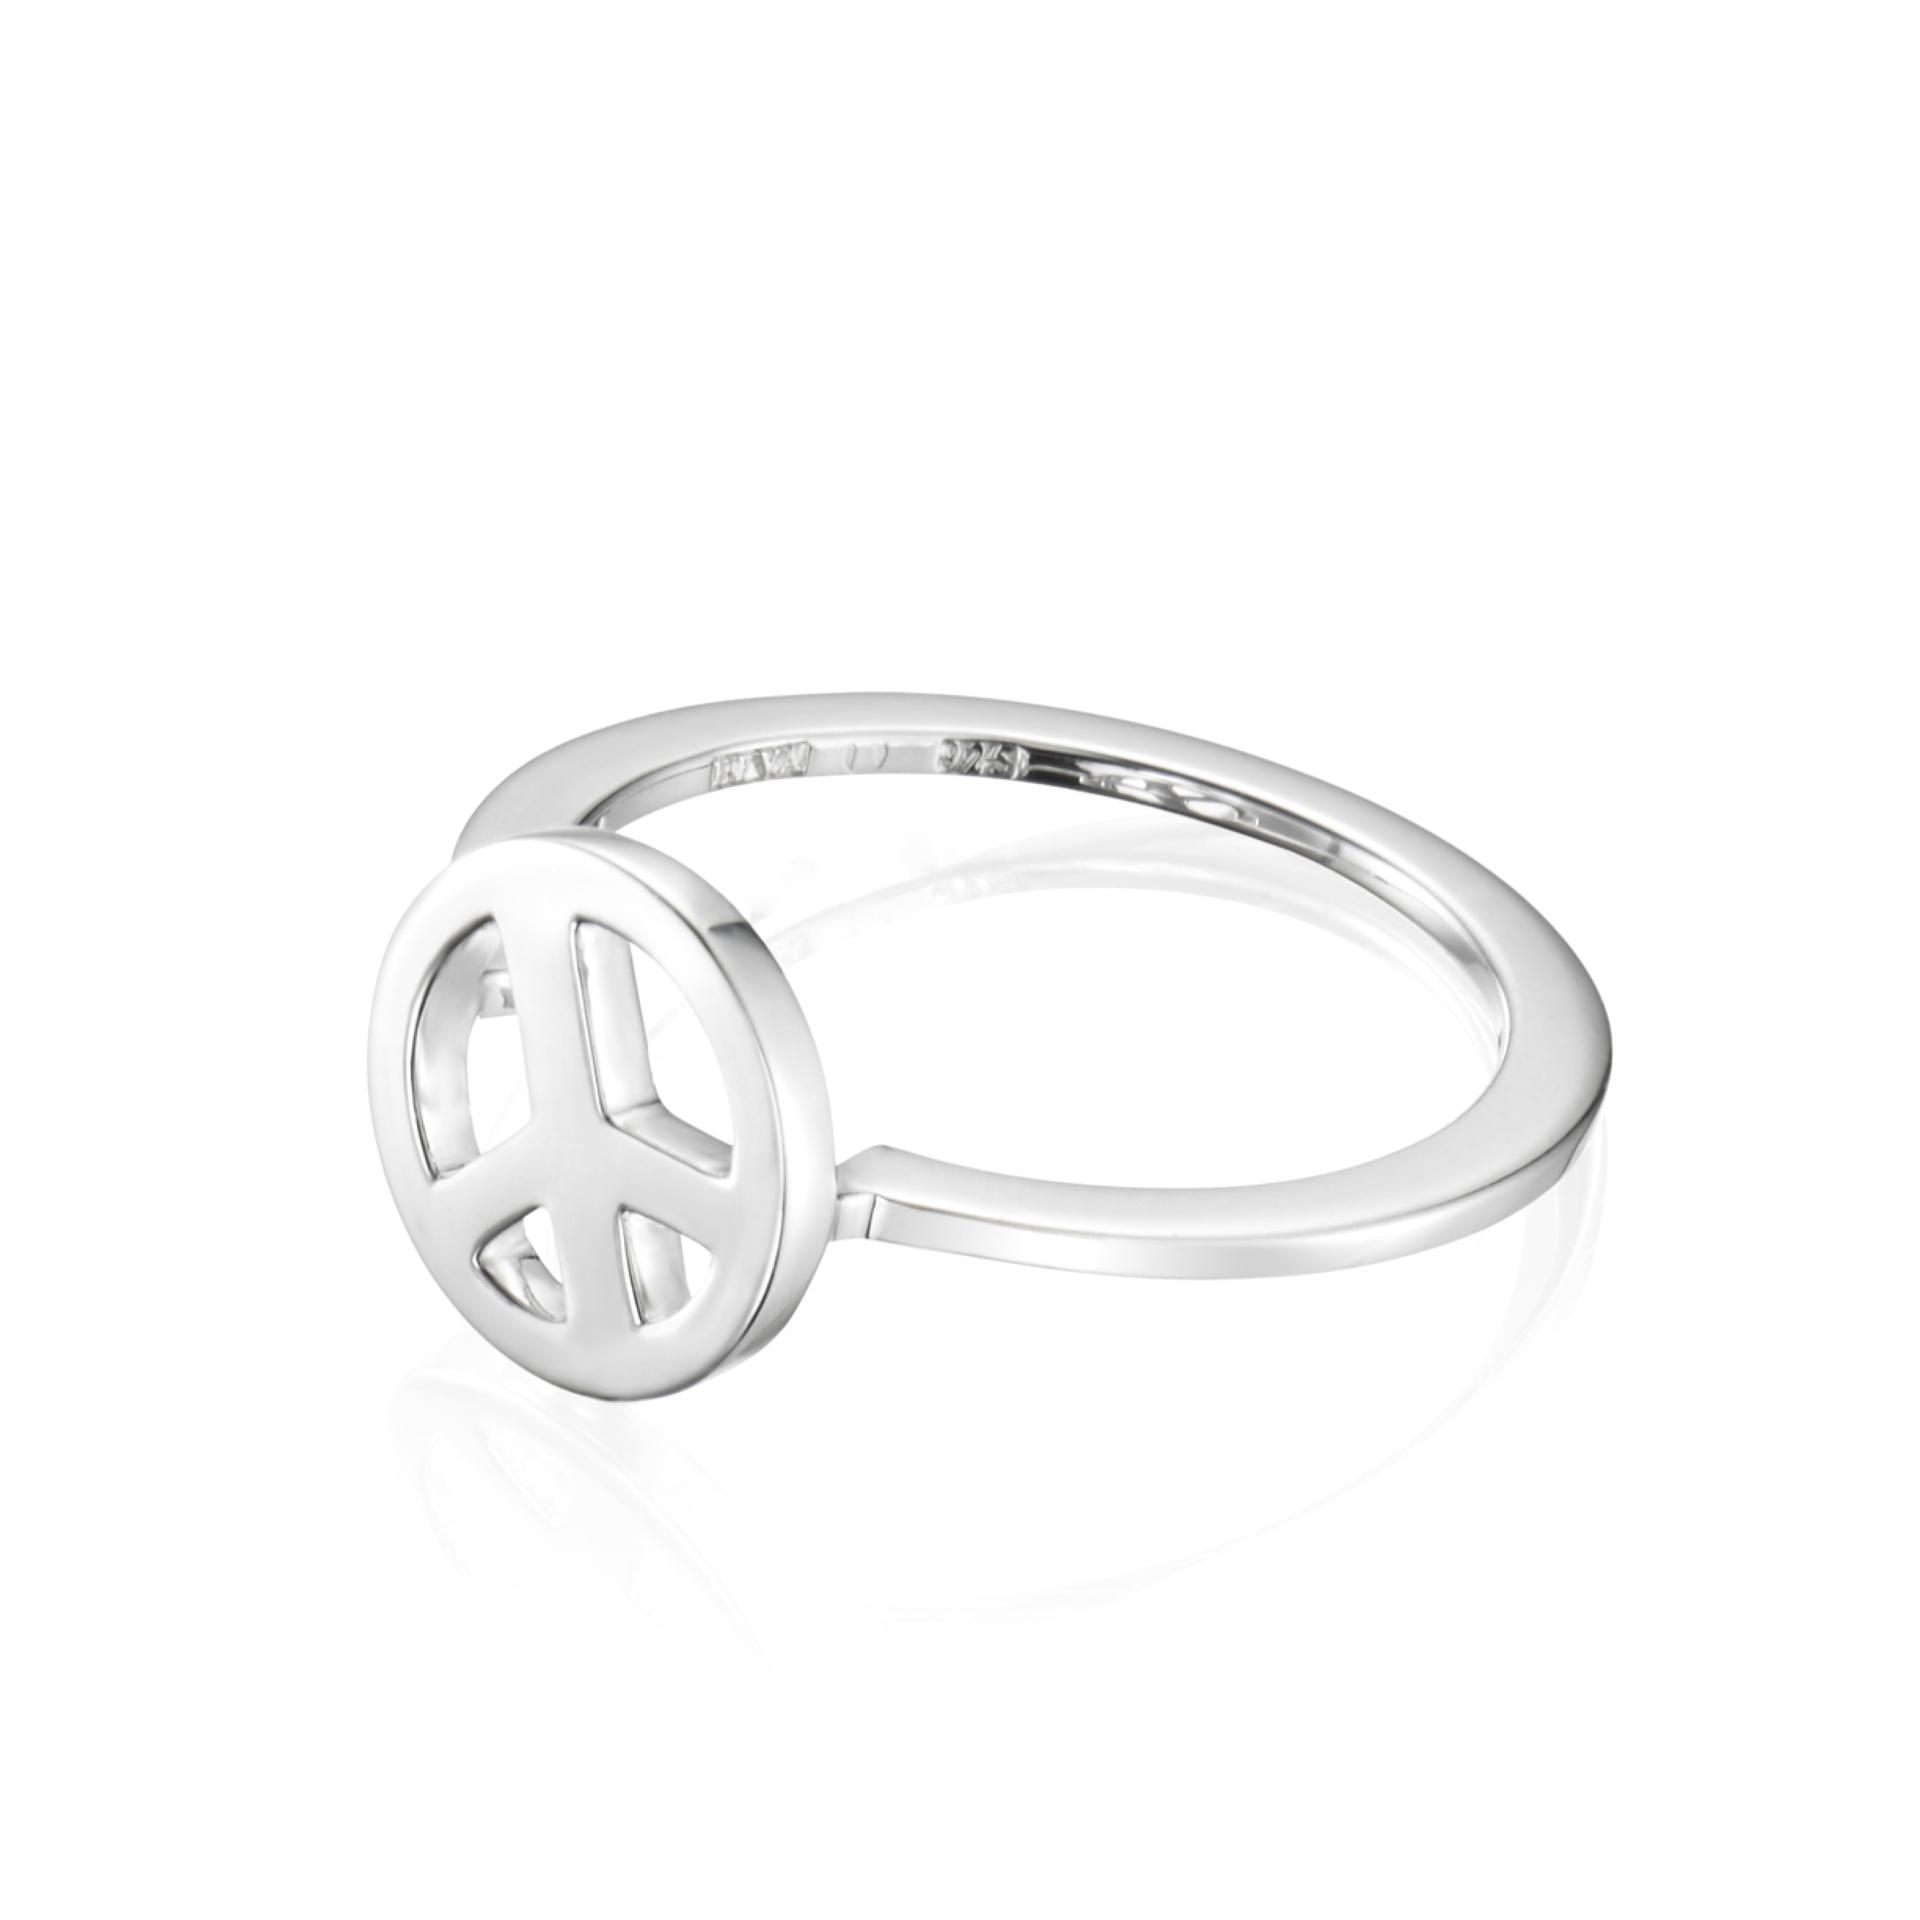 PEACE RING.